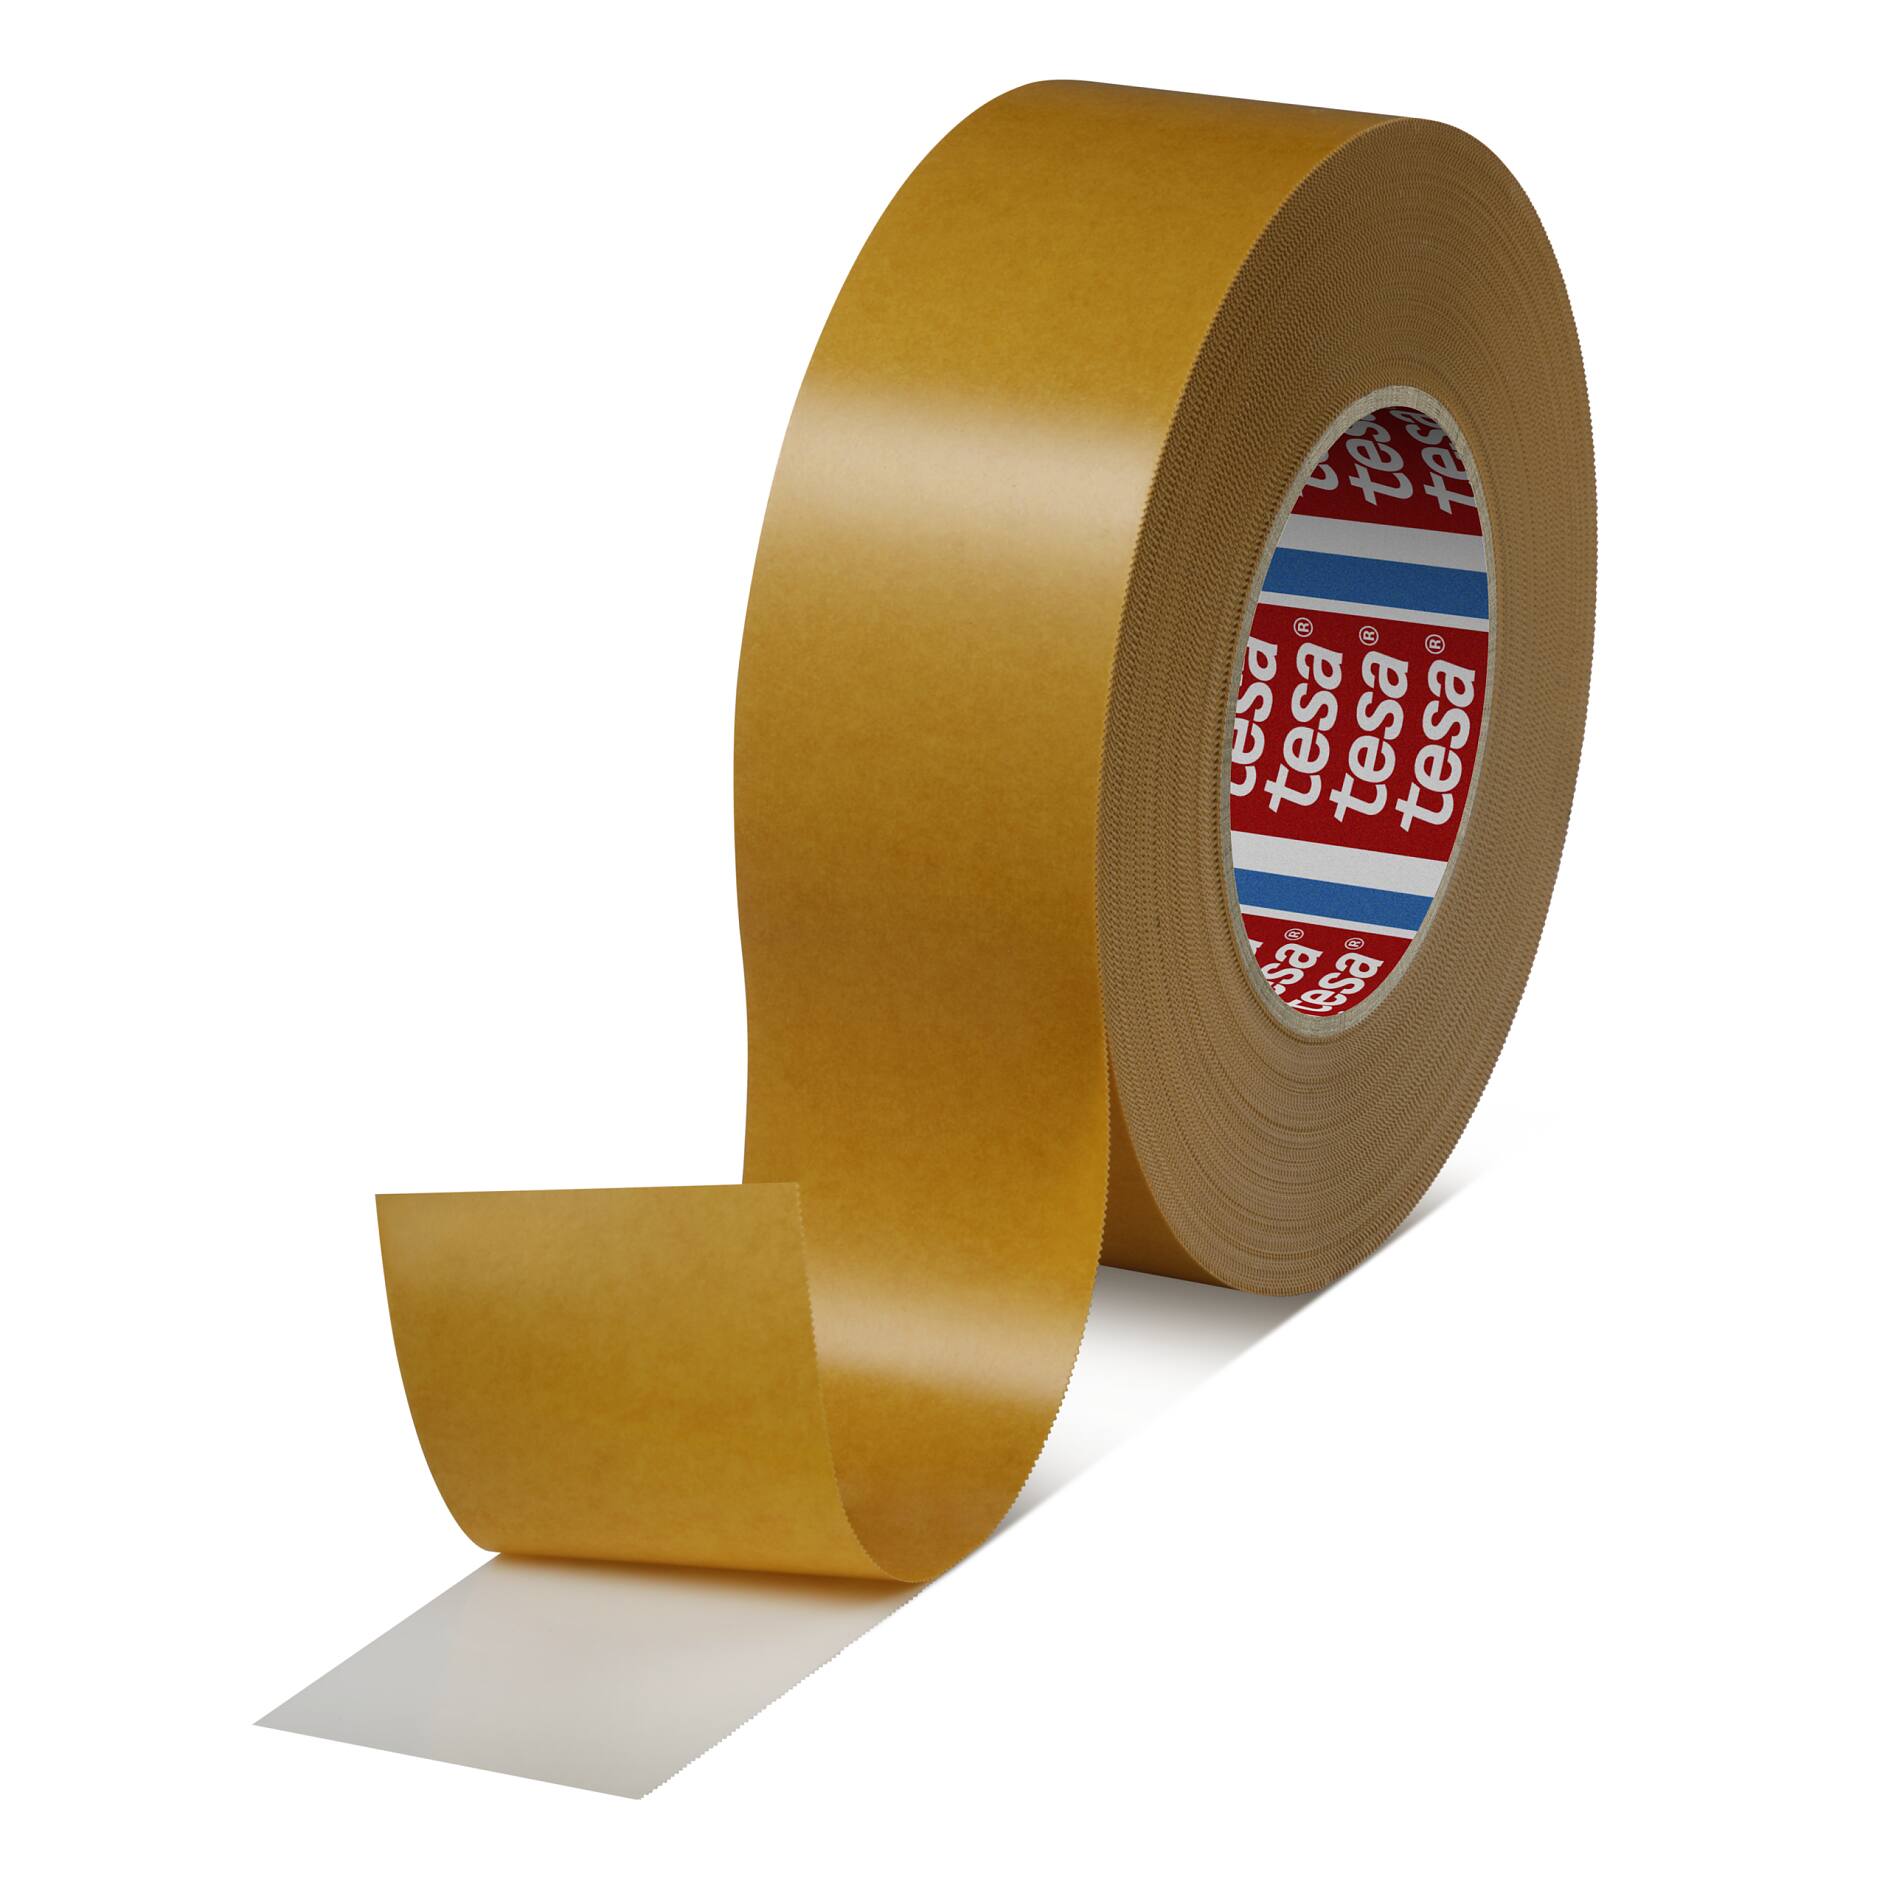 Tesa® 4934 Double Sided Fabric Tape 24mm x 23metres – Box of 6 Rolls